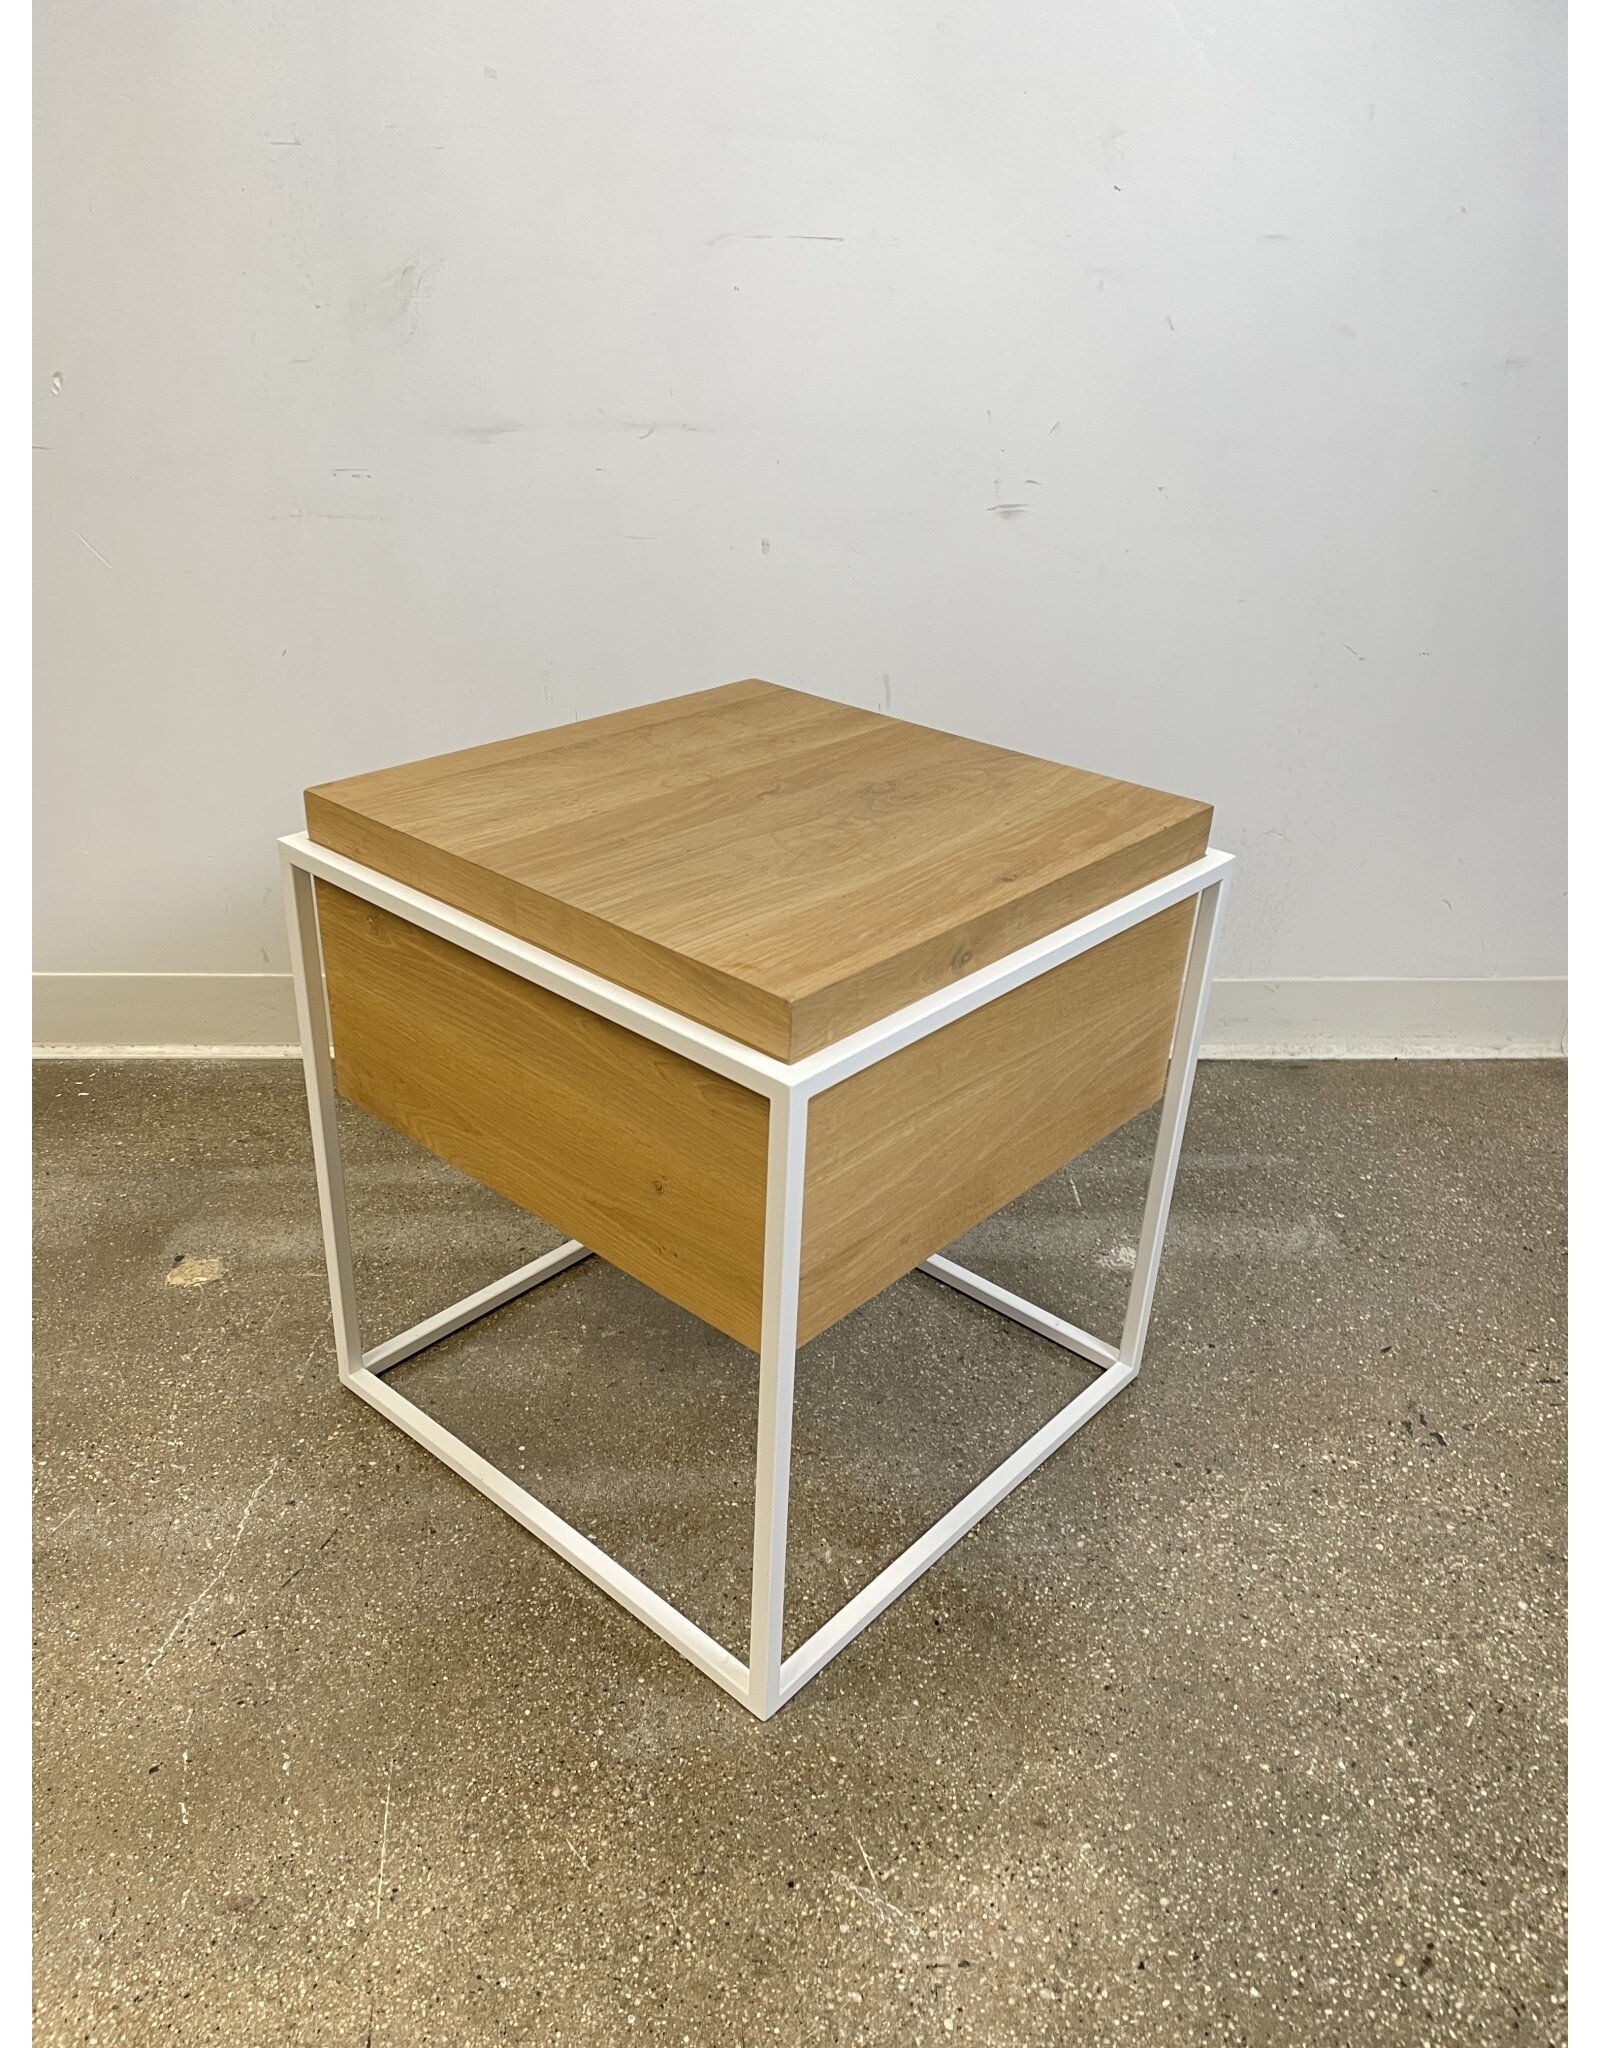 Modern Wooden Side Table with White Metal Frame and Hidden Storage Compartment